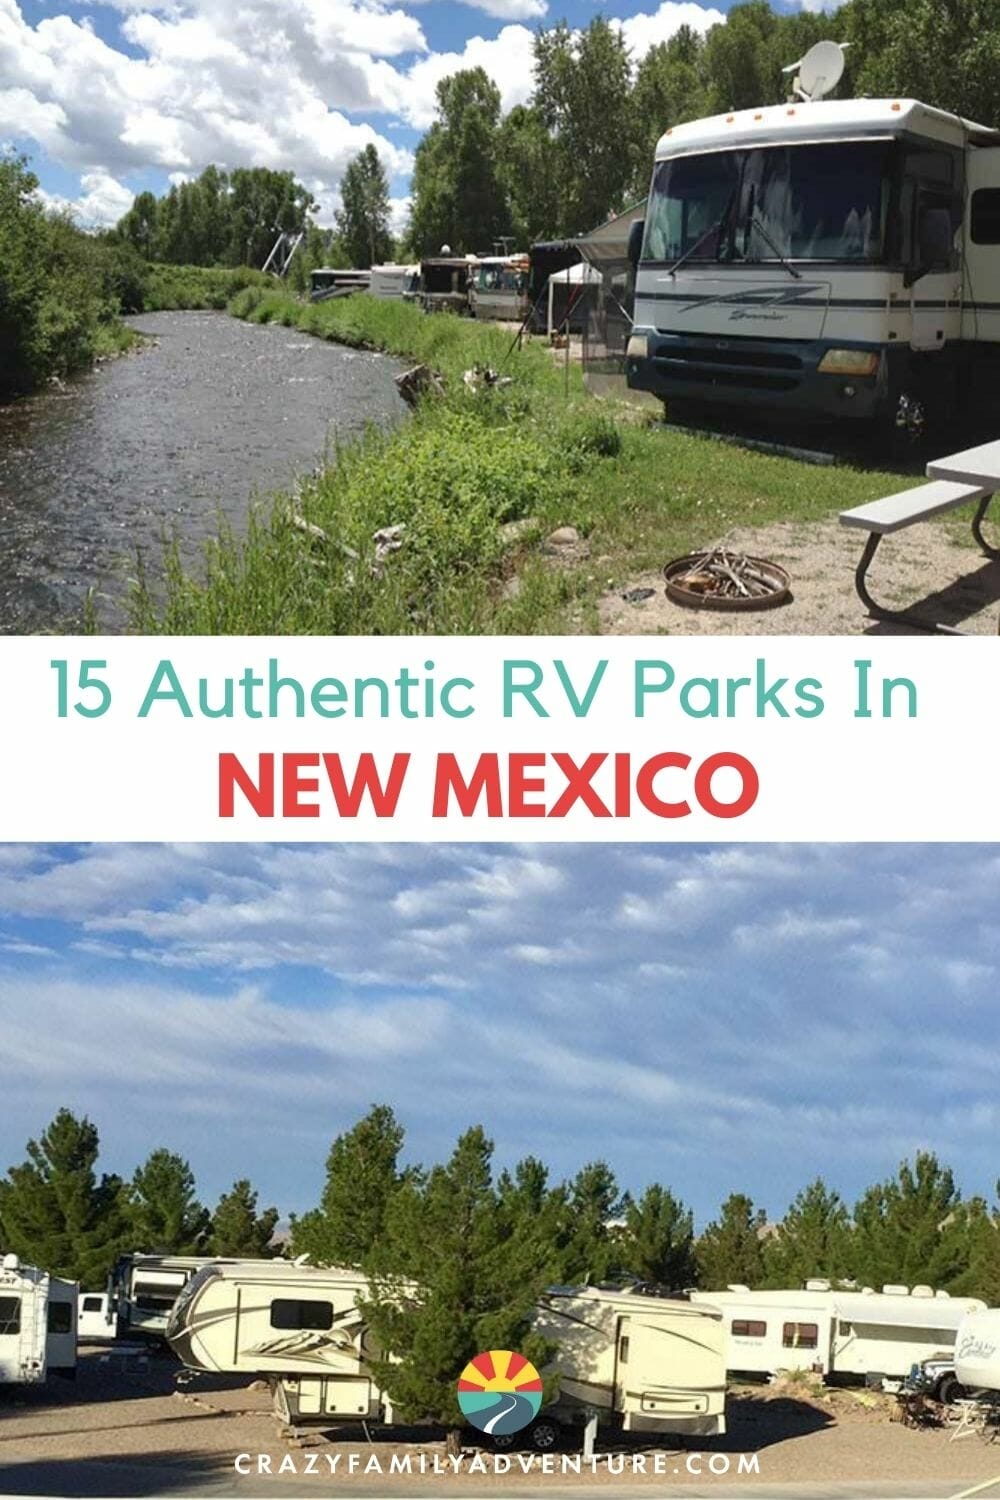 New Mexico is known for its beautiful scenery and outdoor adventures. We have 15 Authentic RV parks in New Mexico worth a visit.